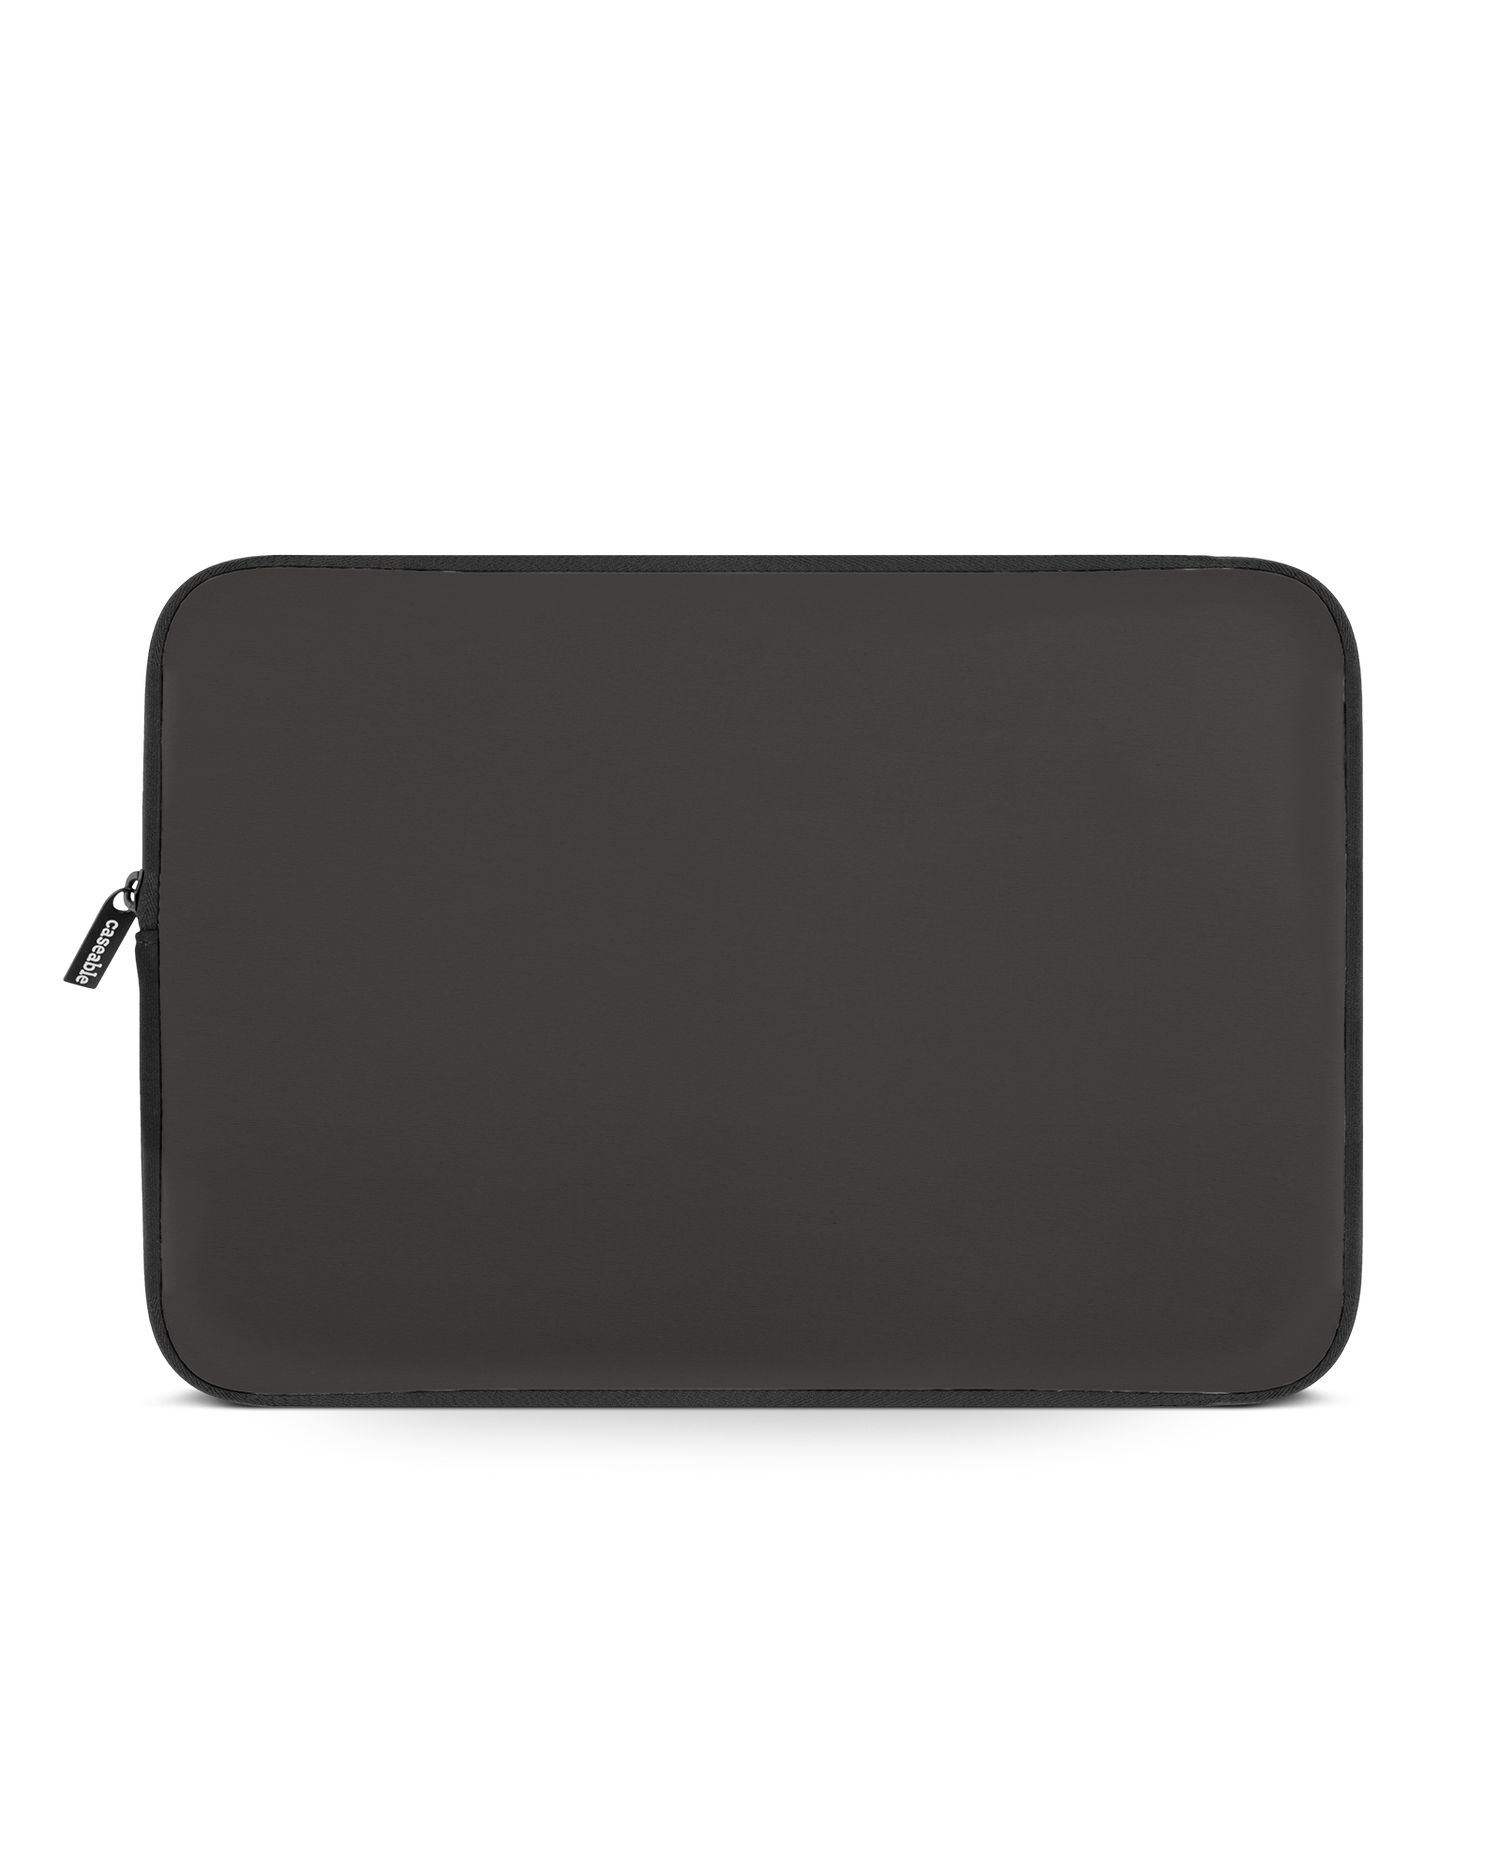 SPACE GREY Laptop Case 14 inch: Front View